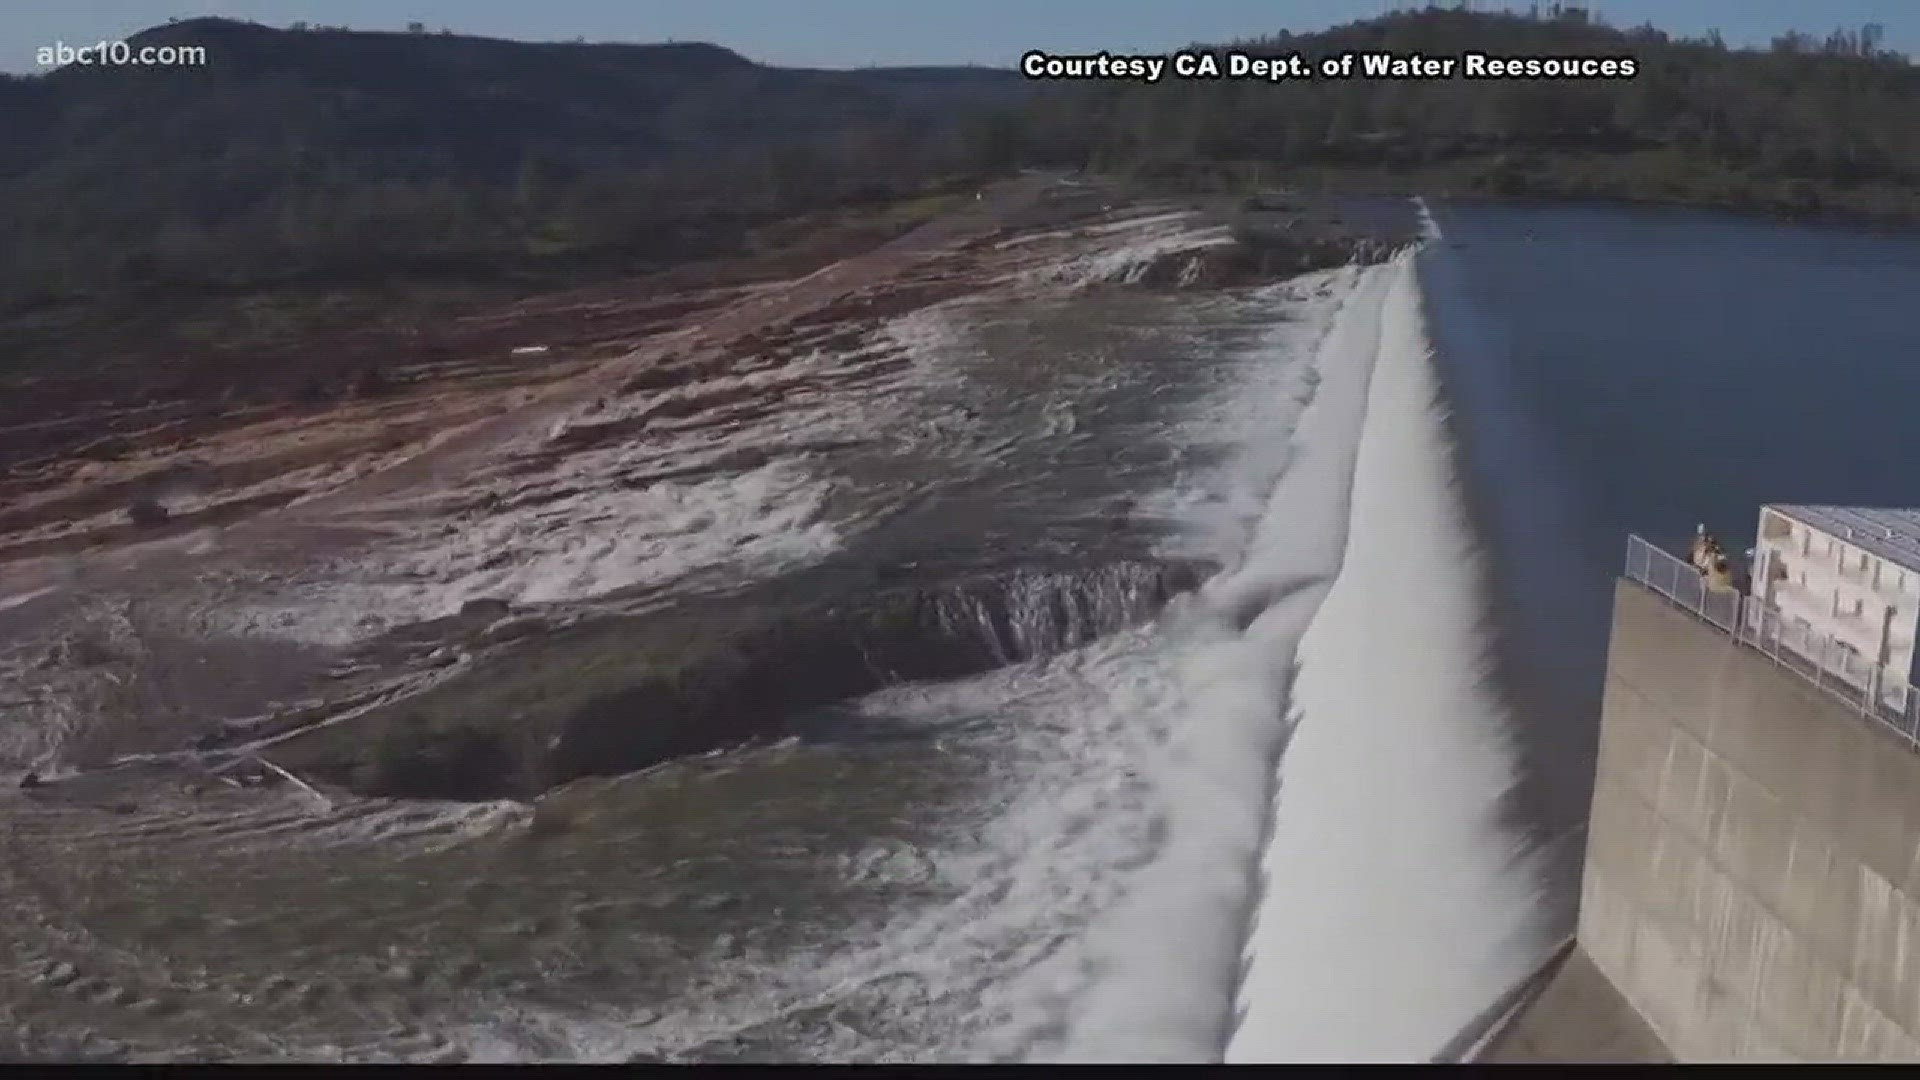 The costs to repair the nation's tallest dam after a nearly catastrophic failure of the spillways will top $500 million, nearly double the original estimate of $275 million, a California Department of Water Resources official said Thursday.